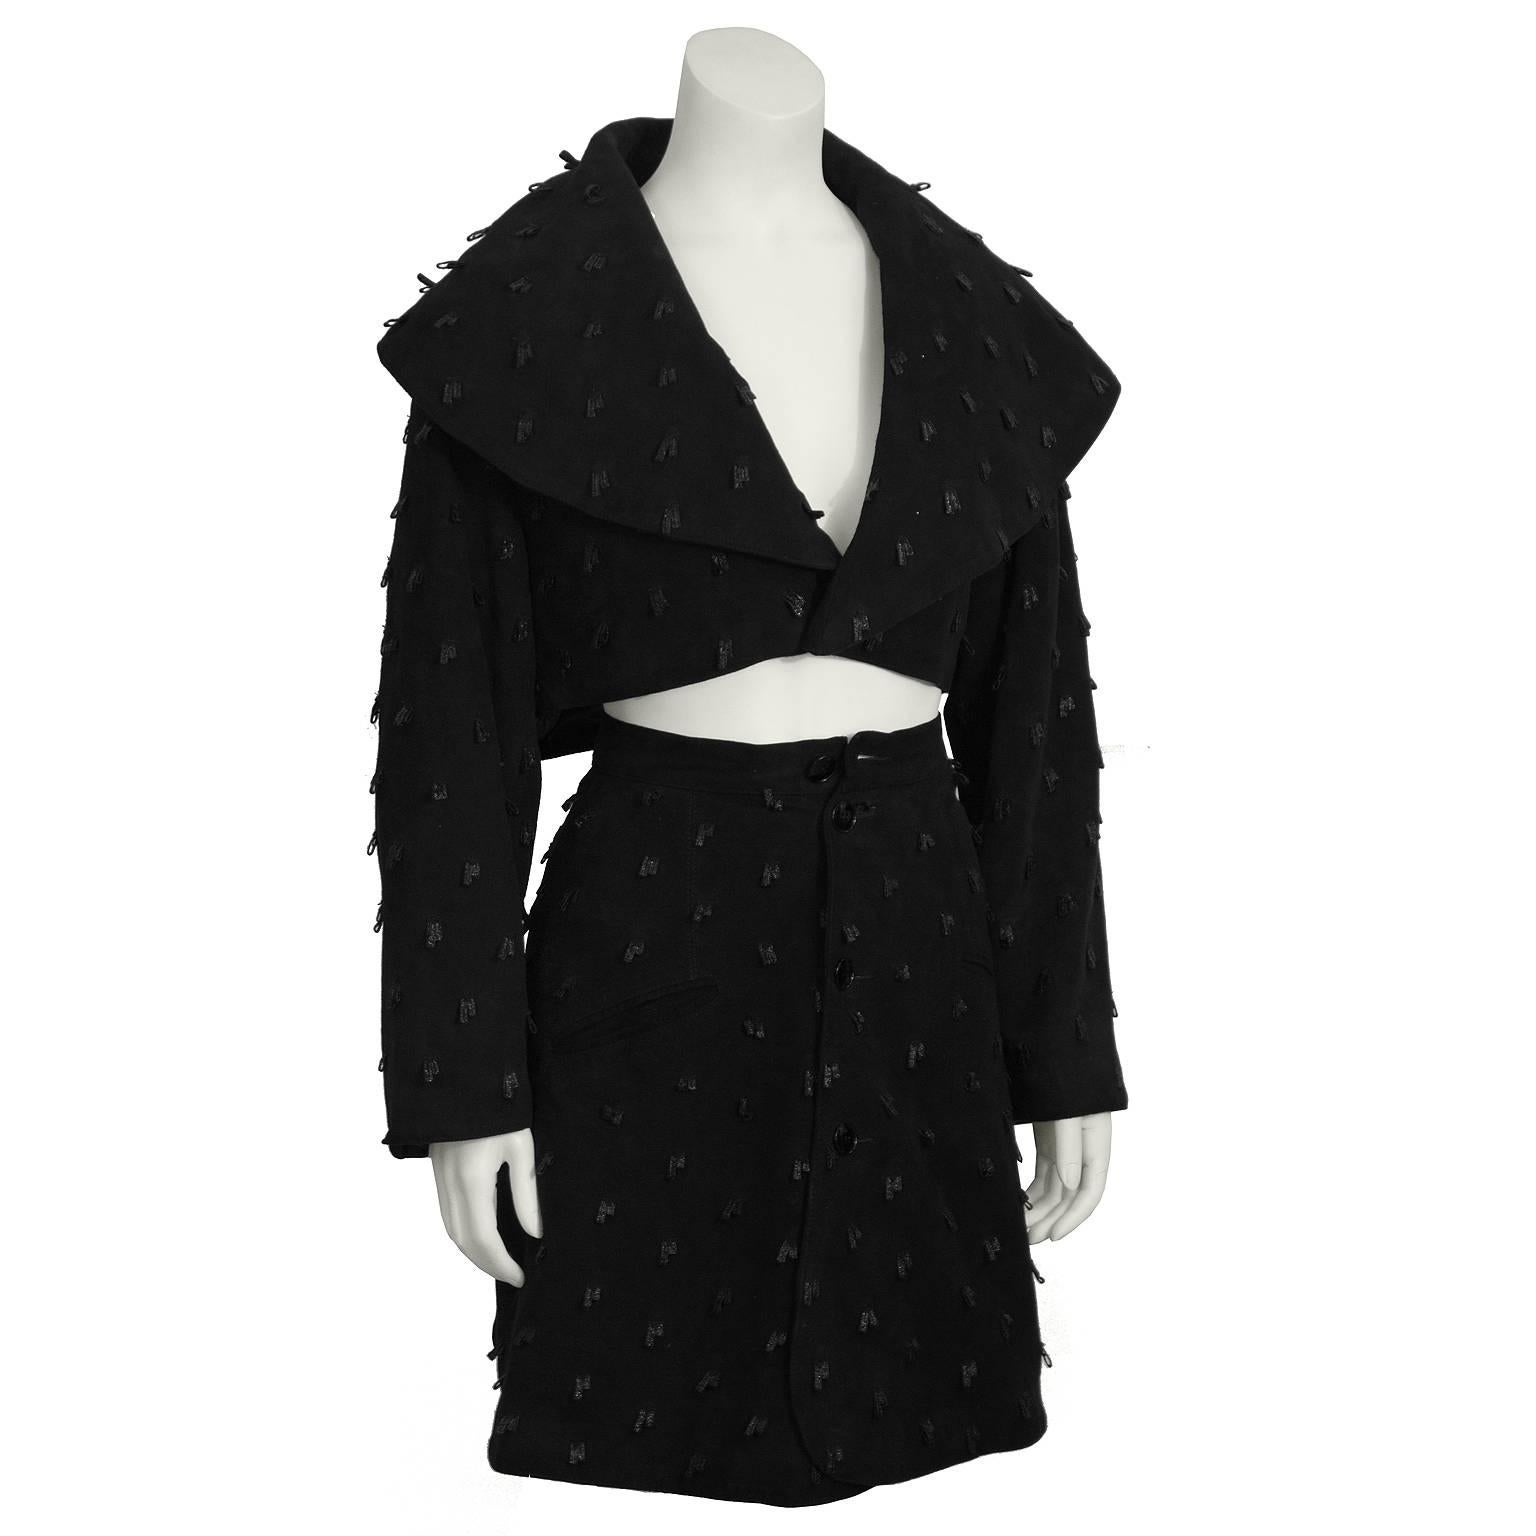 This chic Alaia black suede set from the 1980's features a cropped jacket, and mini skirt. Jacket has extended shawl style collar, and single front button closure. A-line mini wrap skirt has two slit pockets at the hips. Front button closure. Unique